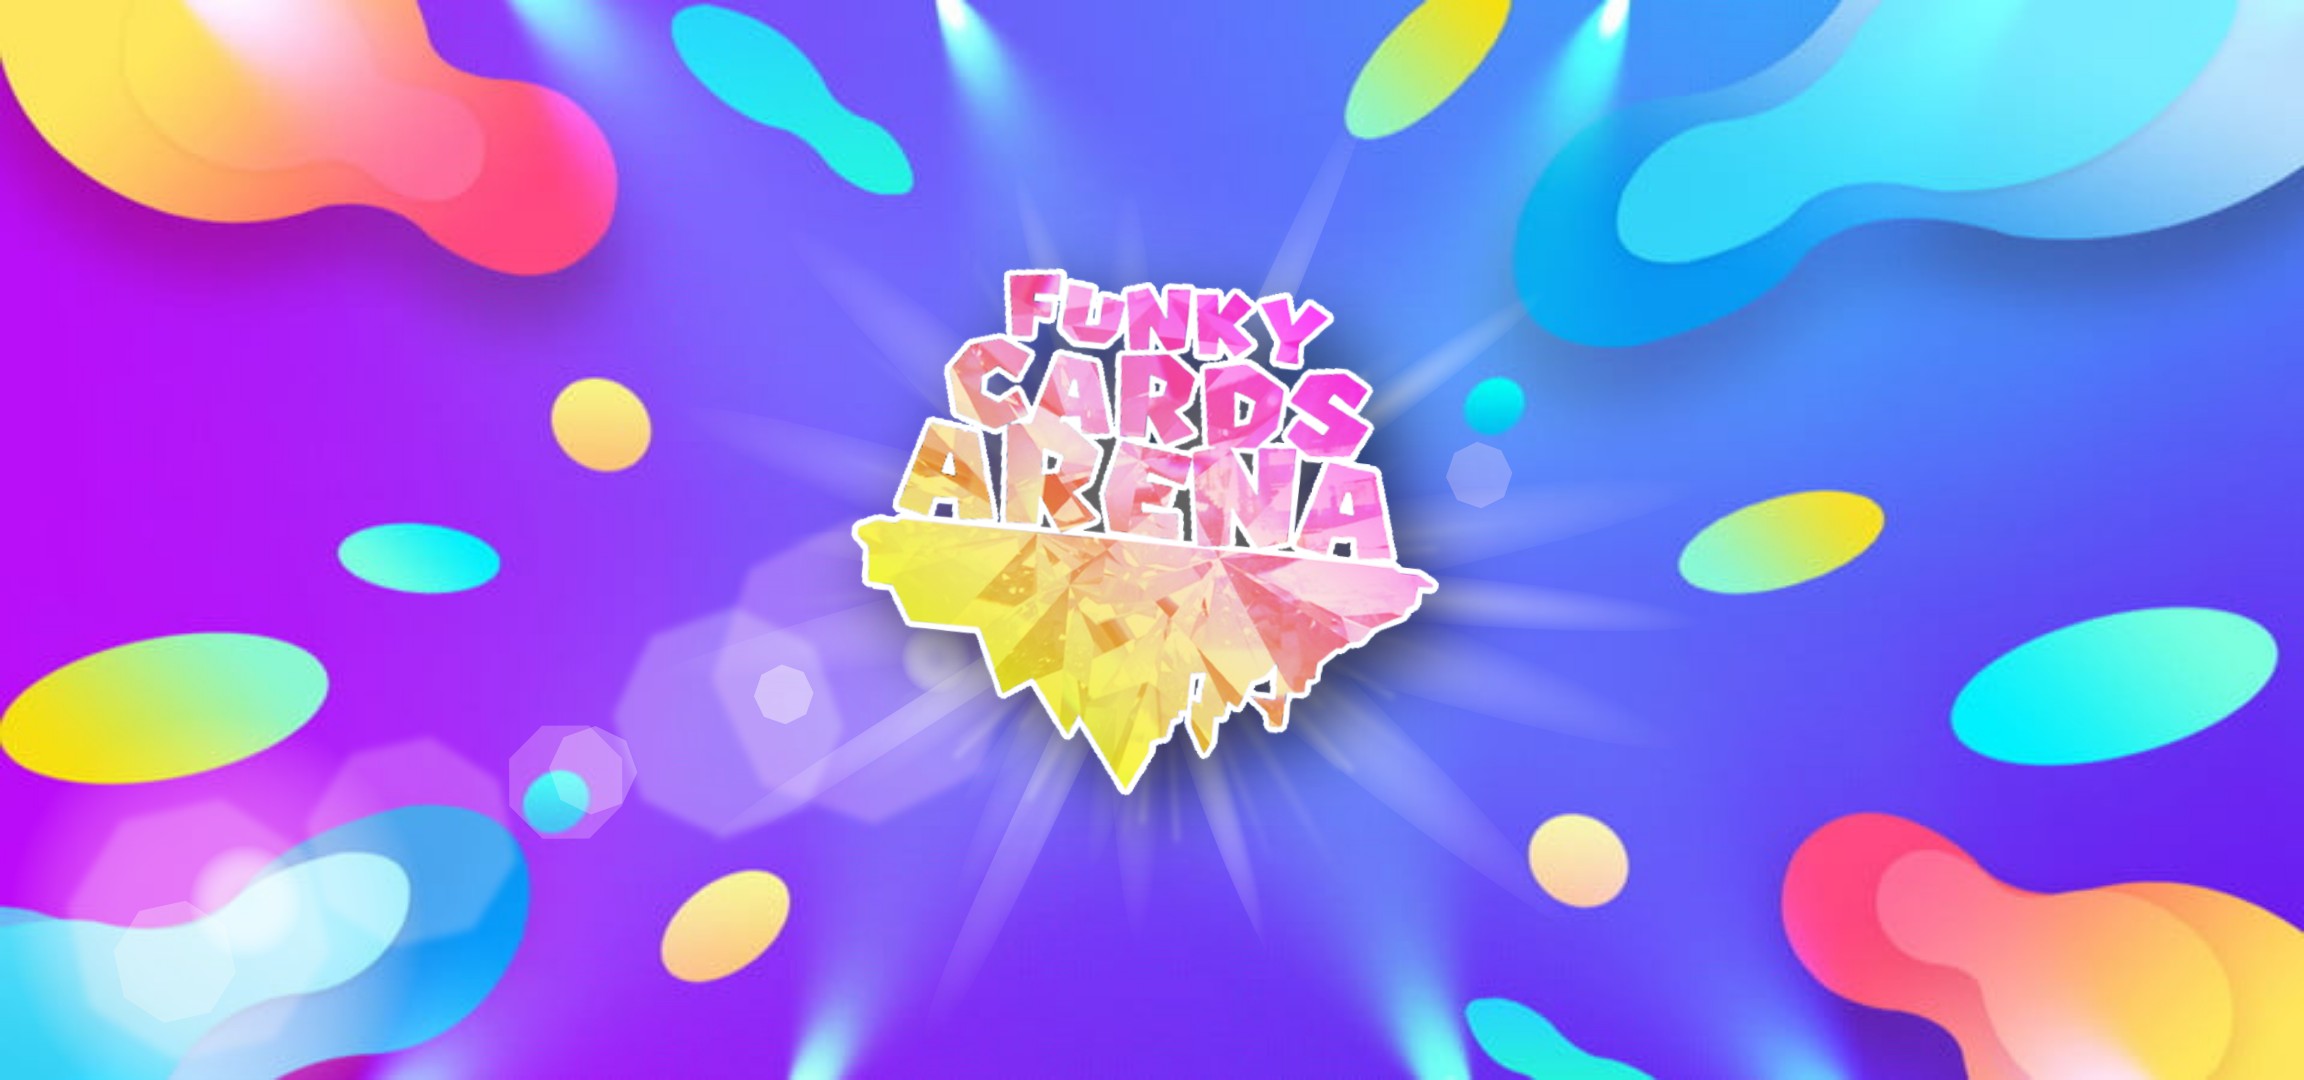 Funky Cards Arena